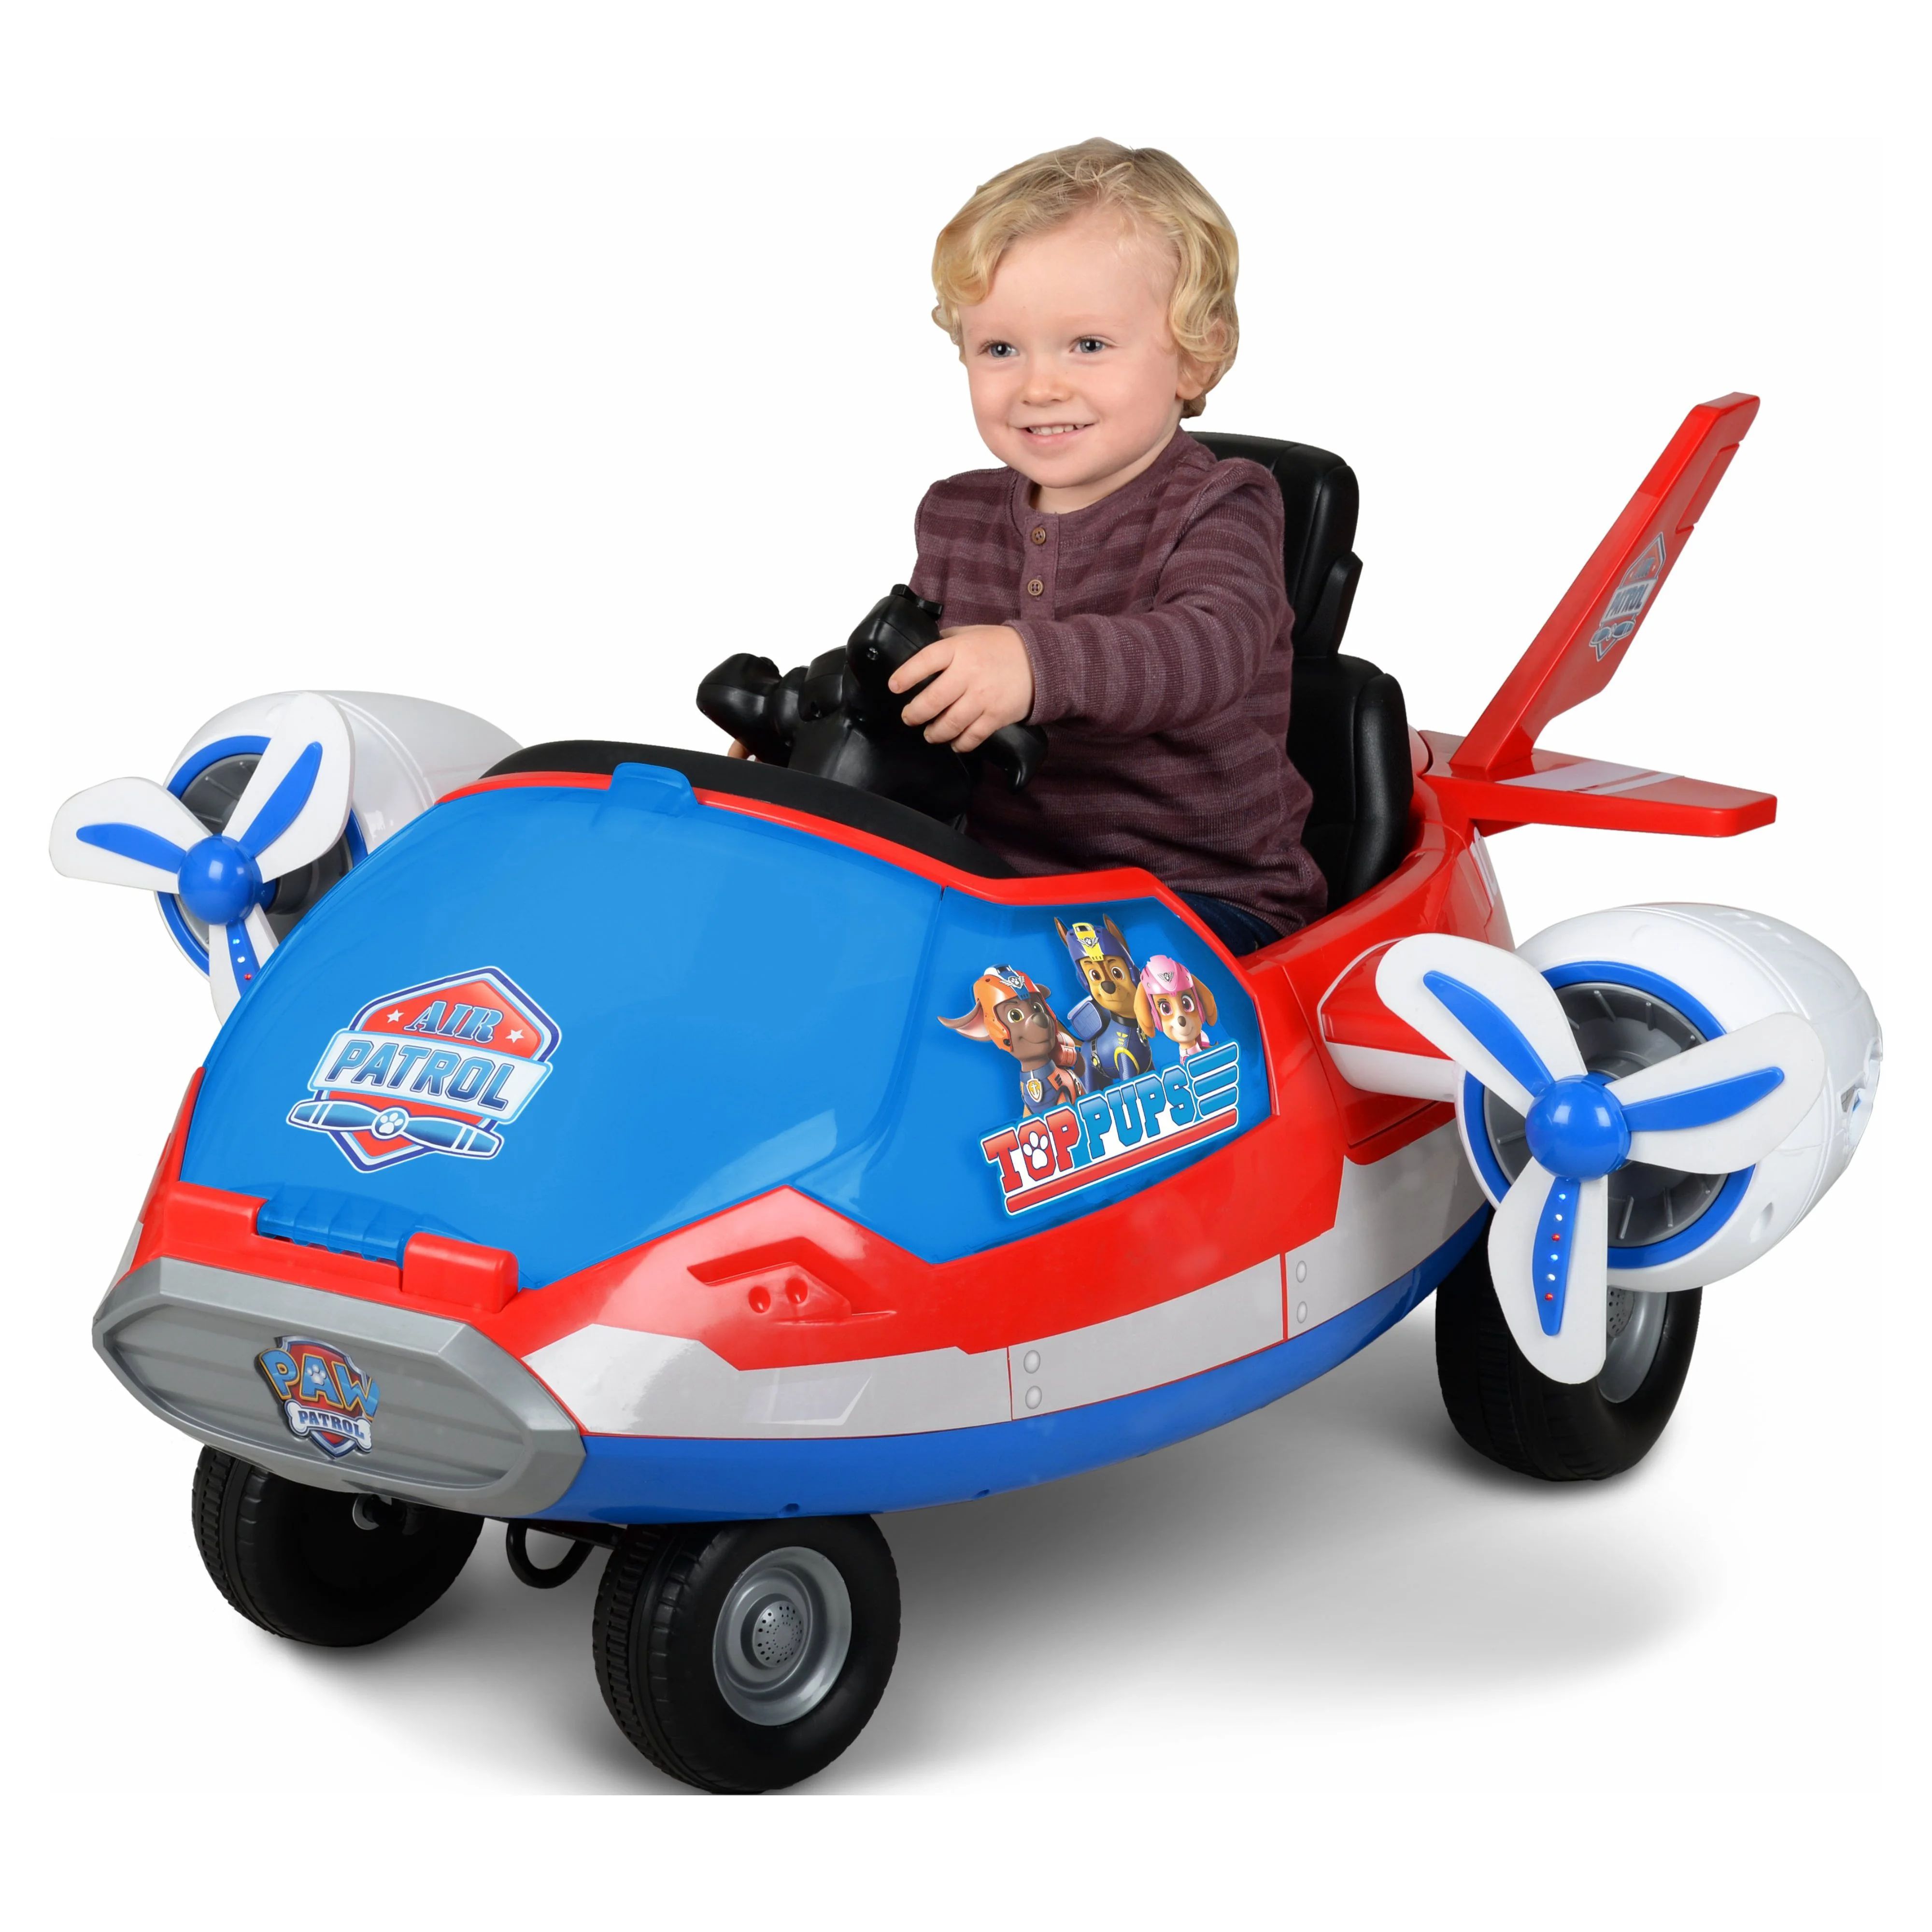 Nickelodeon 12 Volt Paw Patrol Airplane Battery Powered Ride On by Hyper Toys | Walmart (US)